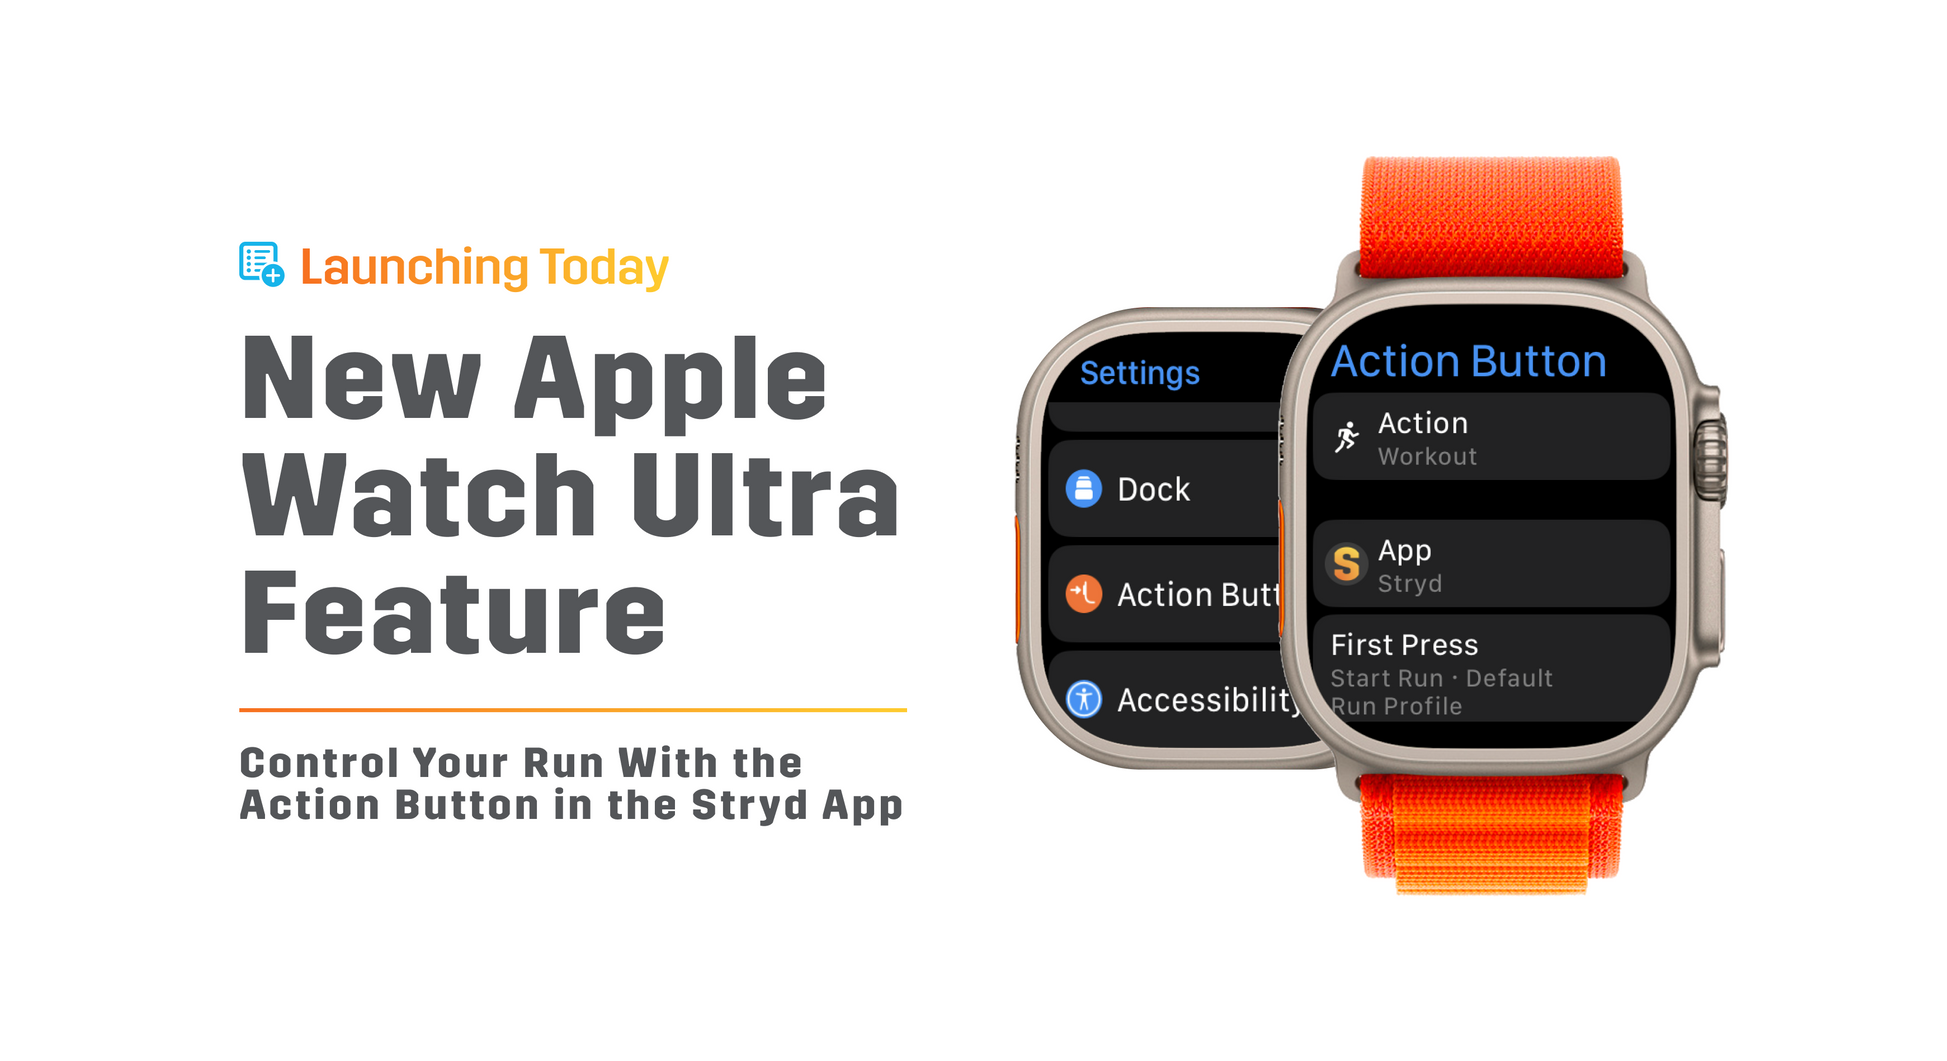 New Apple Watch Ultra Feature: Control your run with the Action Button in the Stryd App